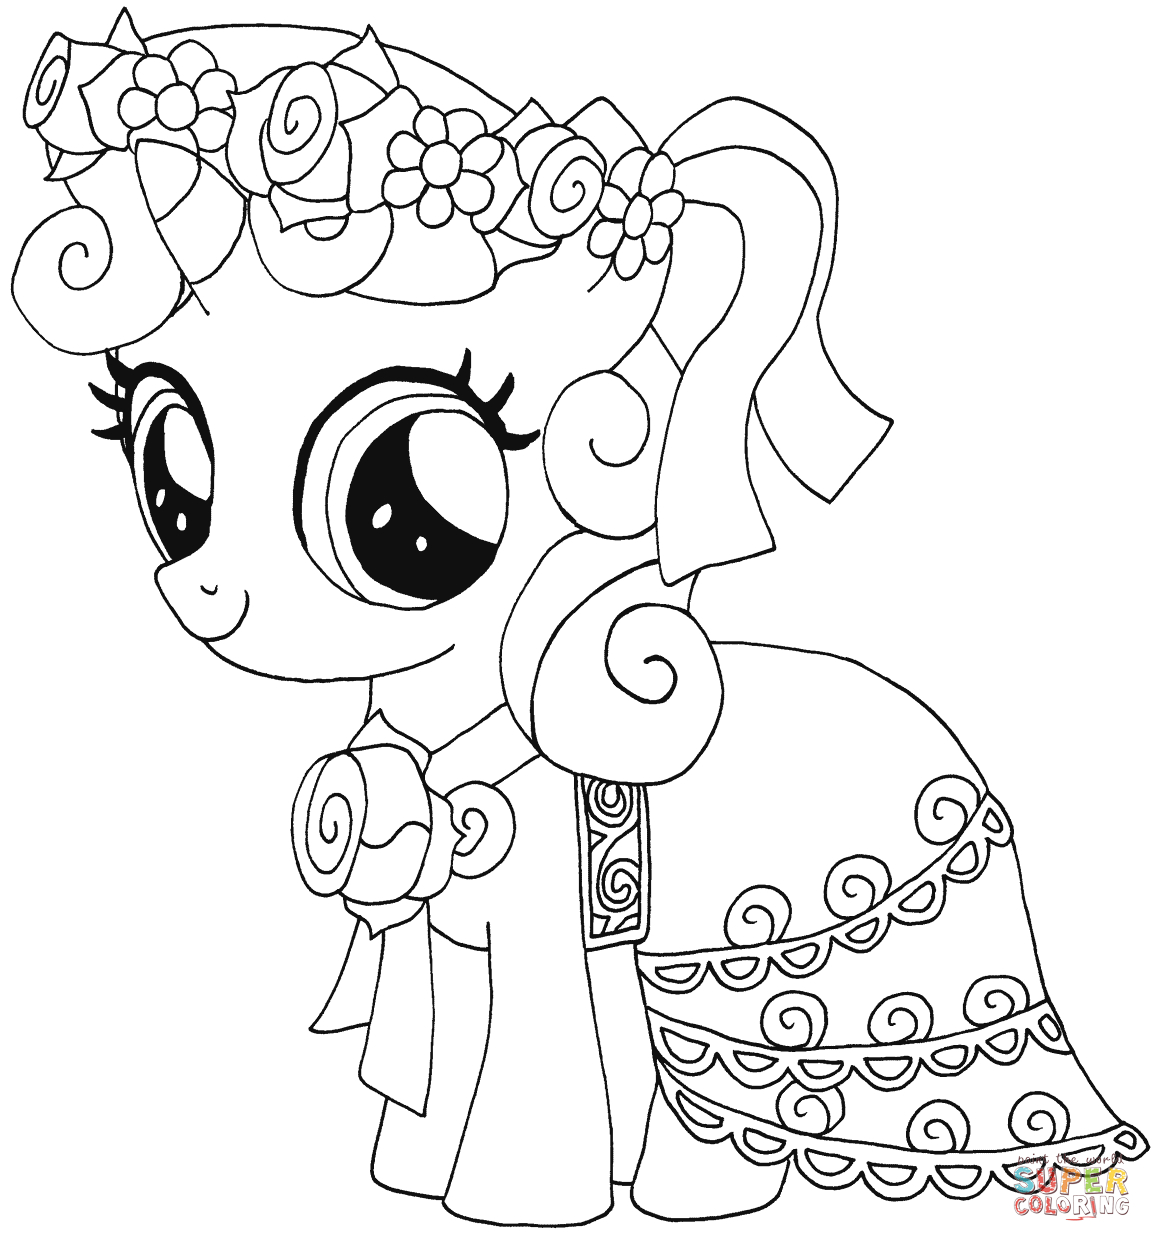 My Little Pony Sweetie Belle Coloring Page Free